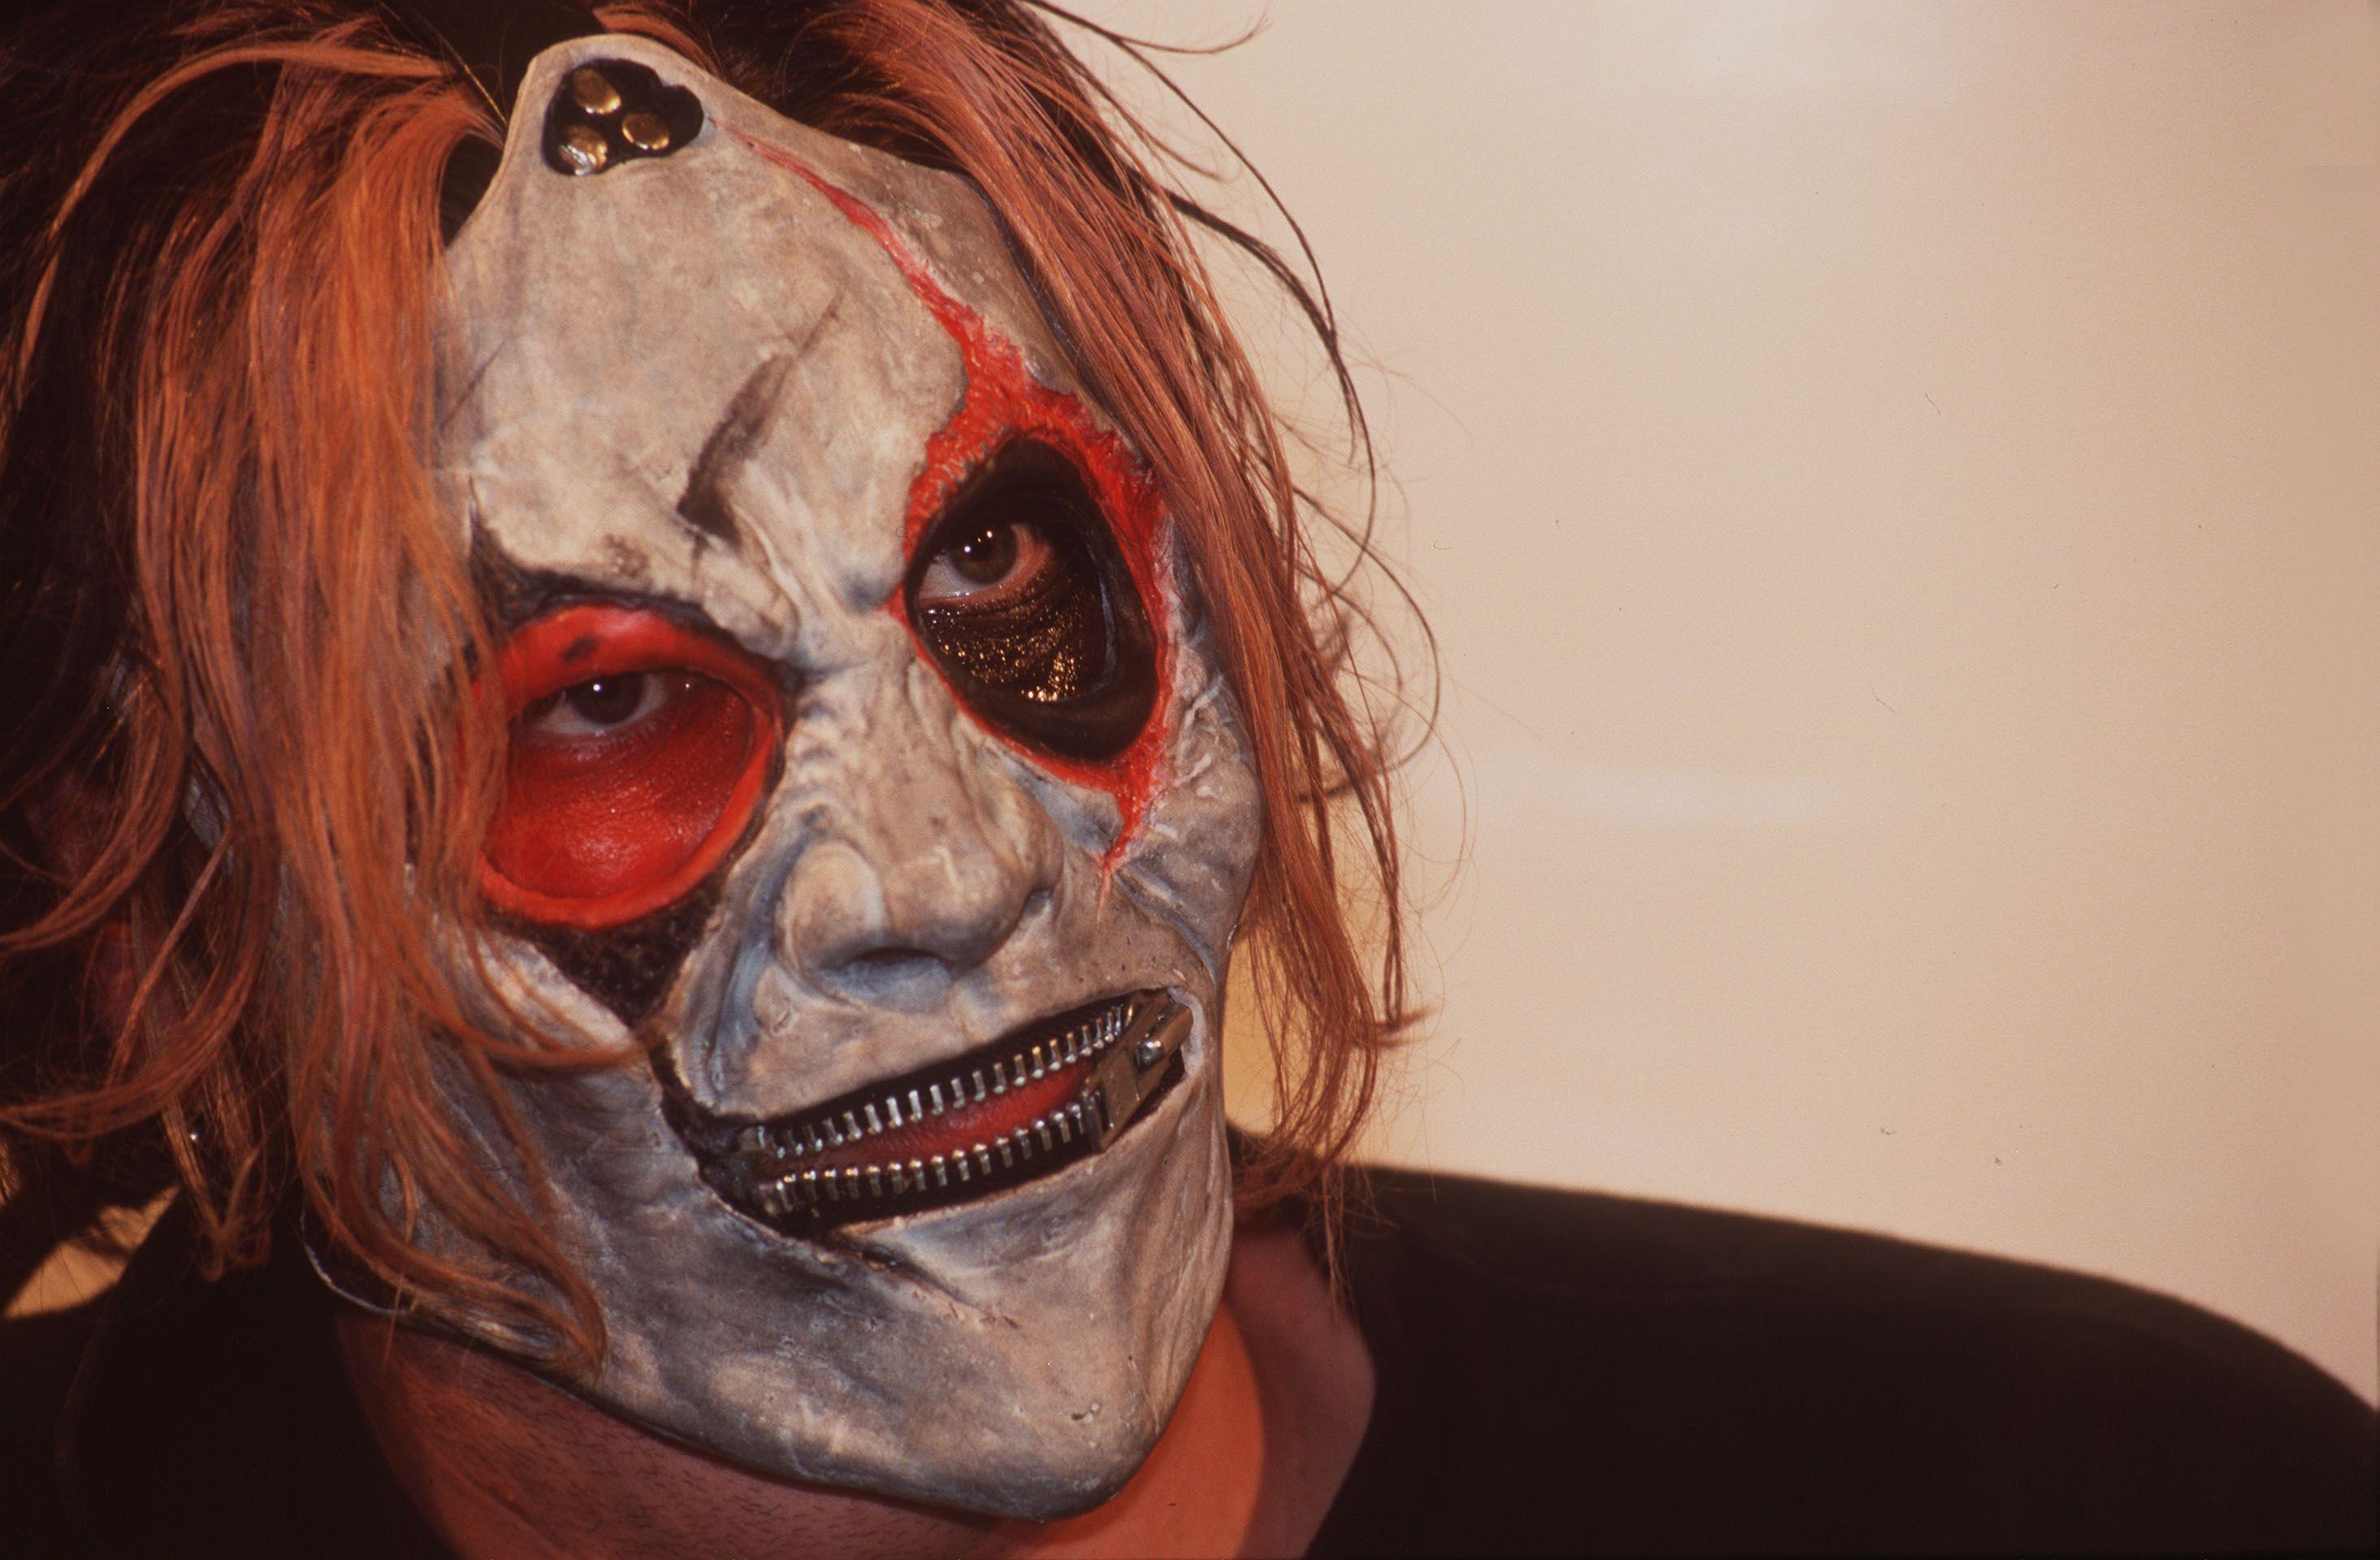 Slipknot's Jim Root Defends the Band's Attempts to Help Deceased